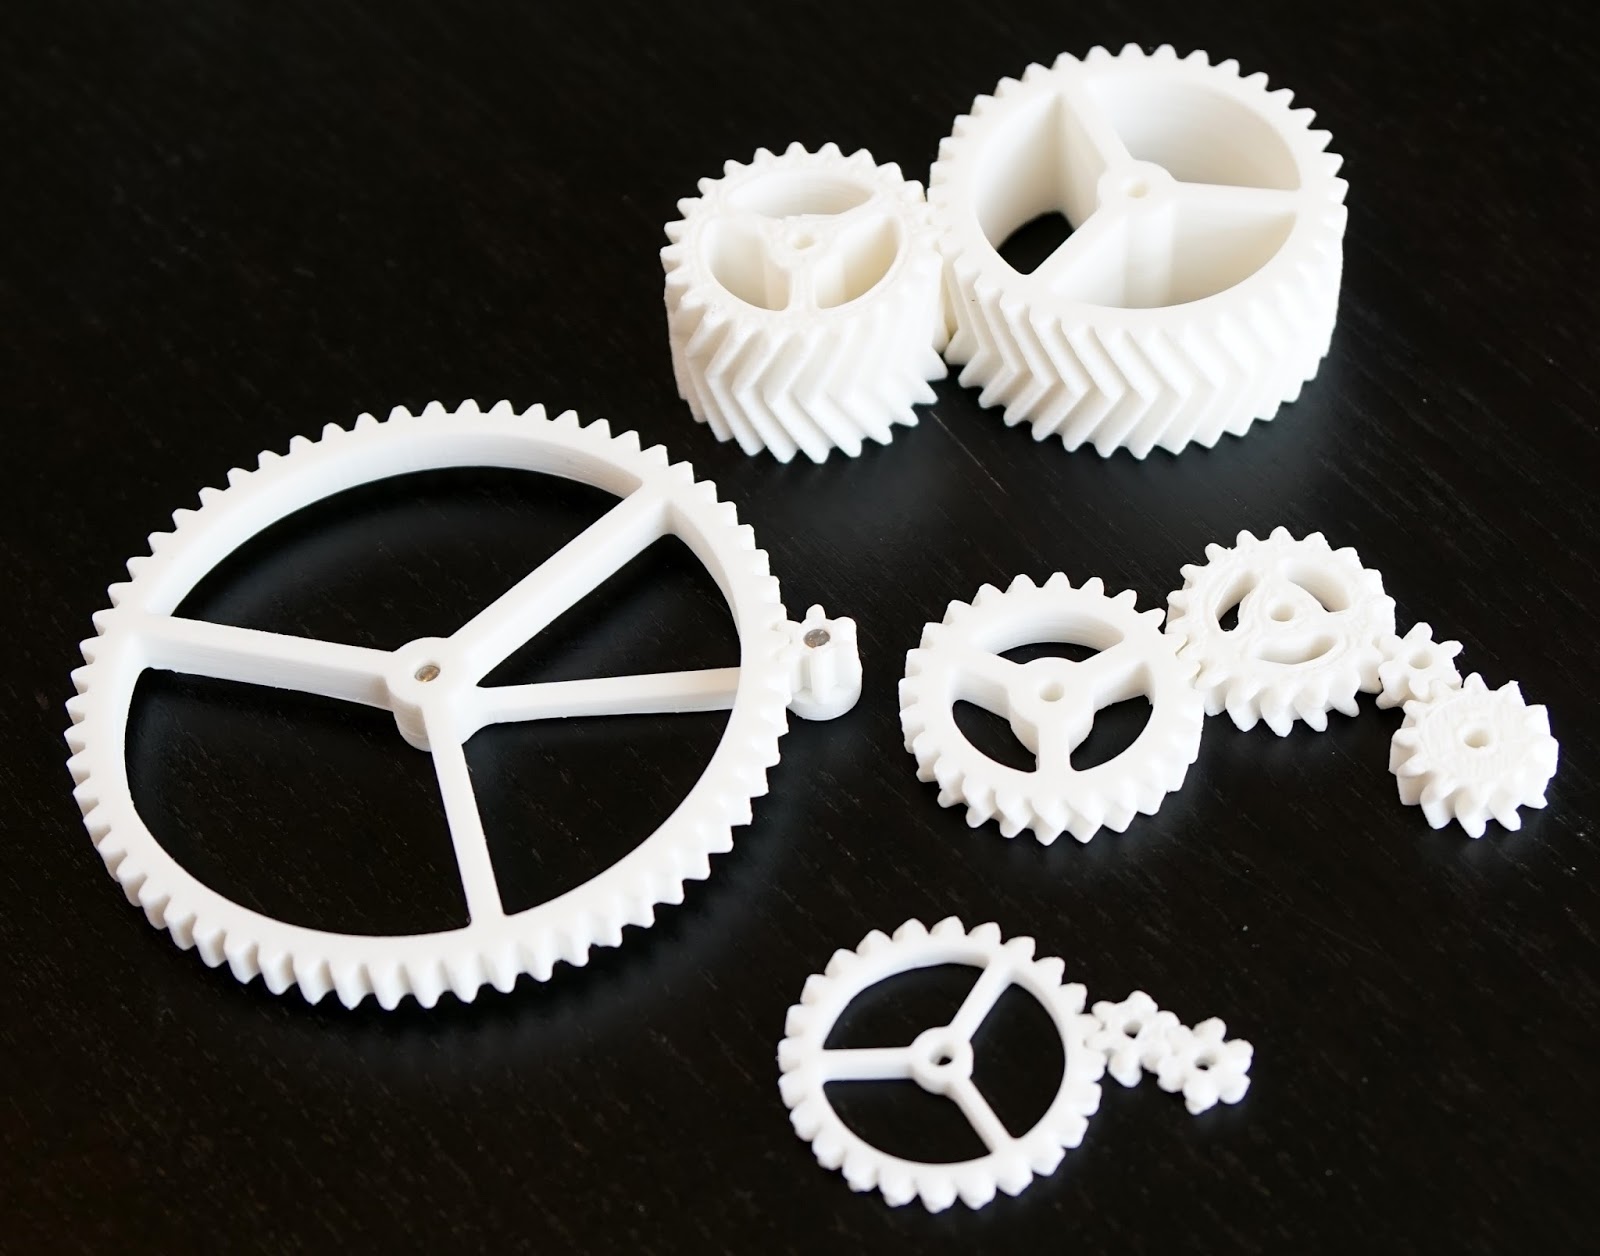 udledning Mexico at føre General Purpose 3D Printed Gears